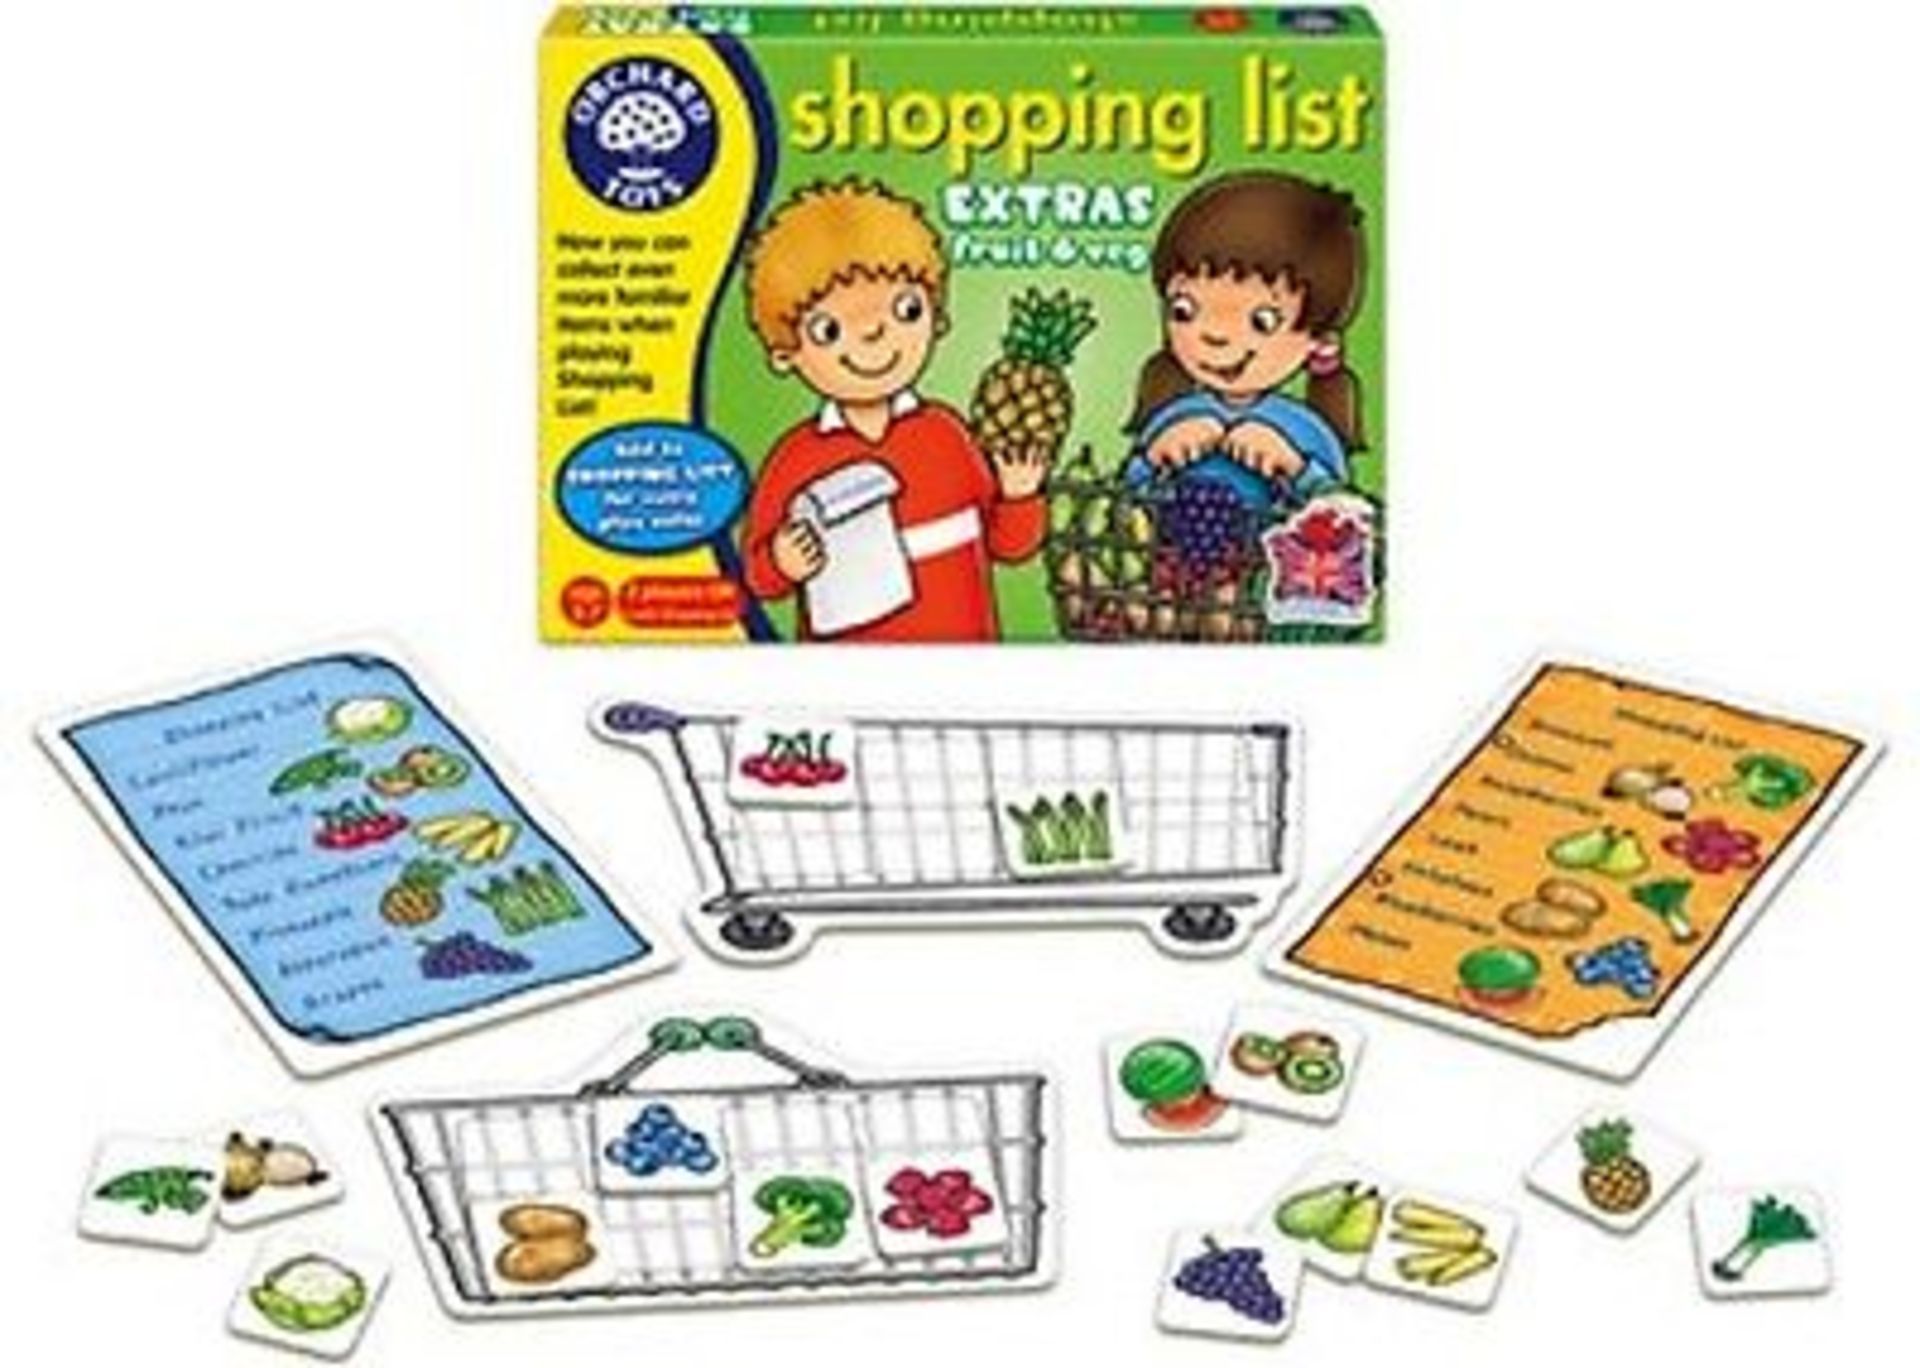 V Brand New A Lot Of Two Orchard Toys Shopping List Booster Packs Fruit & Veg & Clothes Online Price - Image 2 of 2